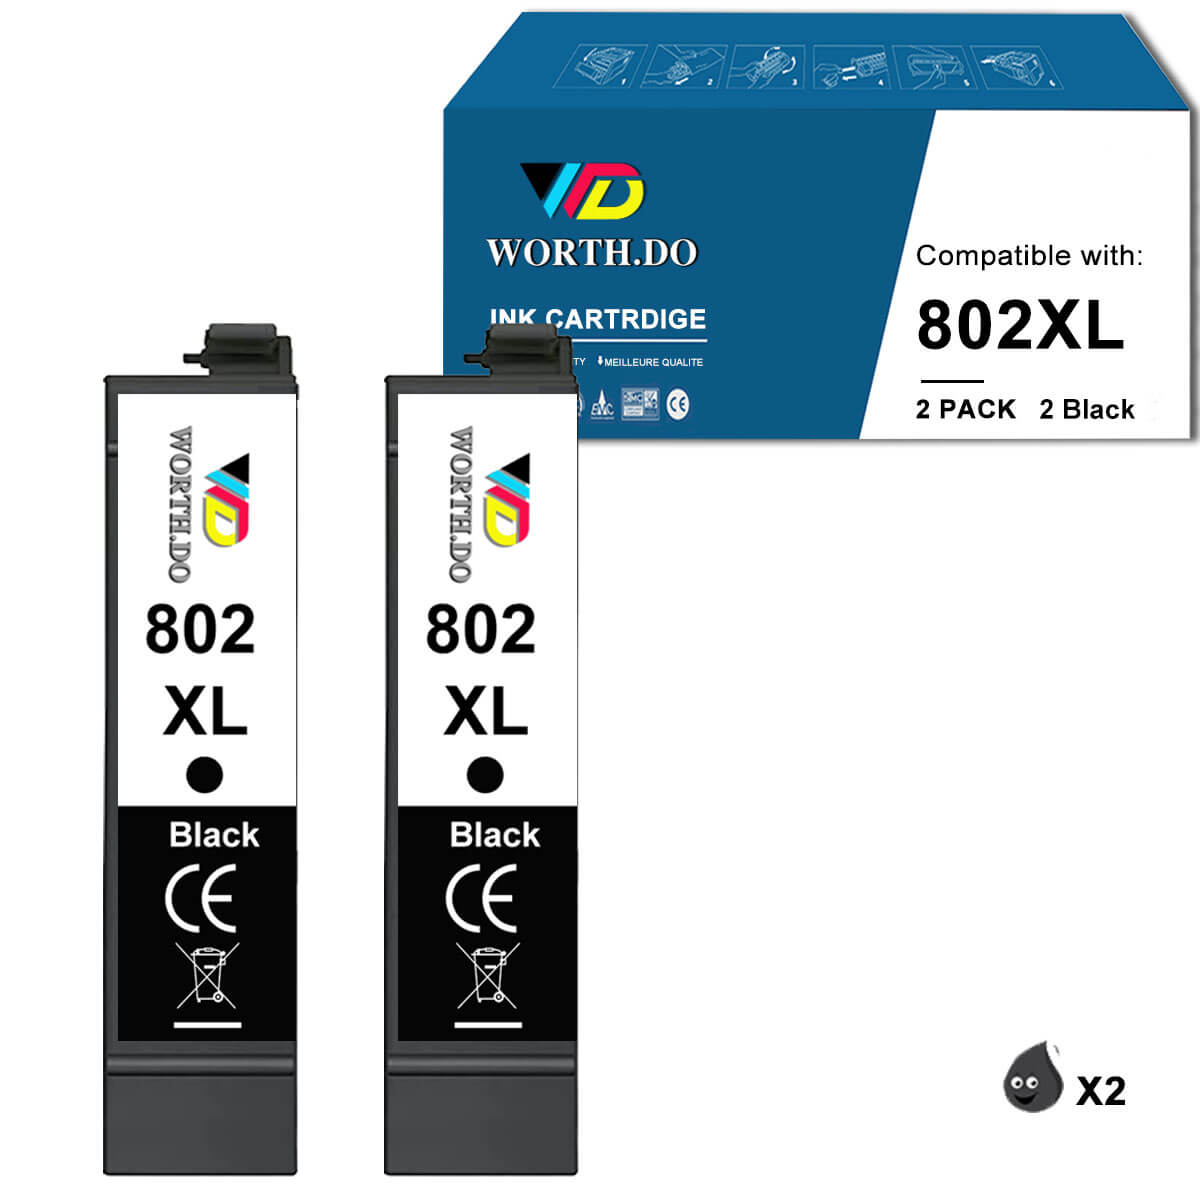 Remanufactured 802XL Premium Ink for Epson (4 Pack)